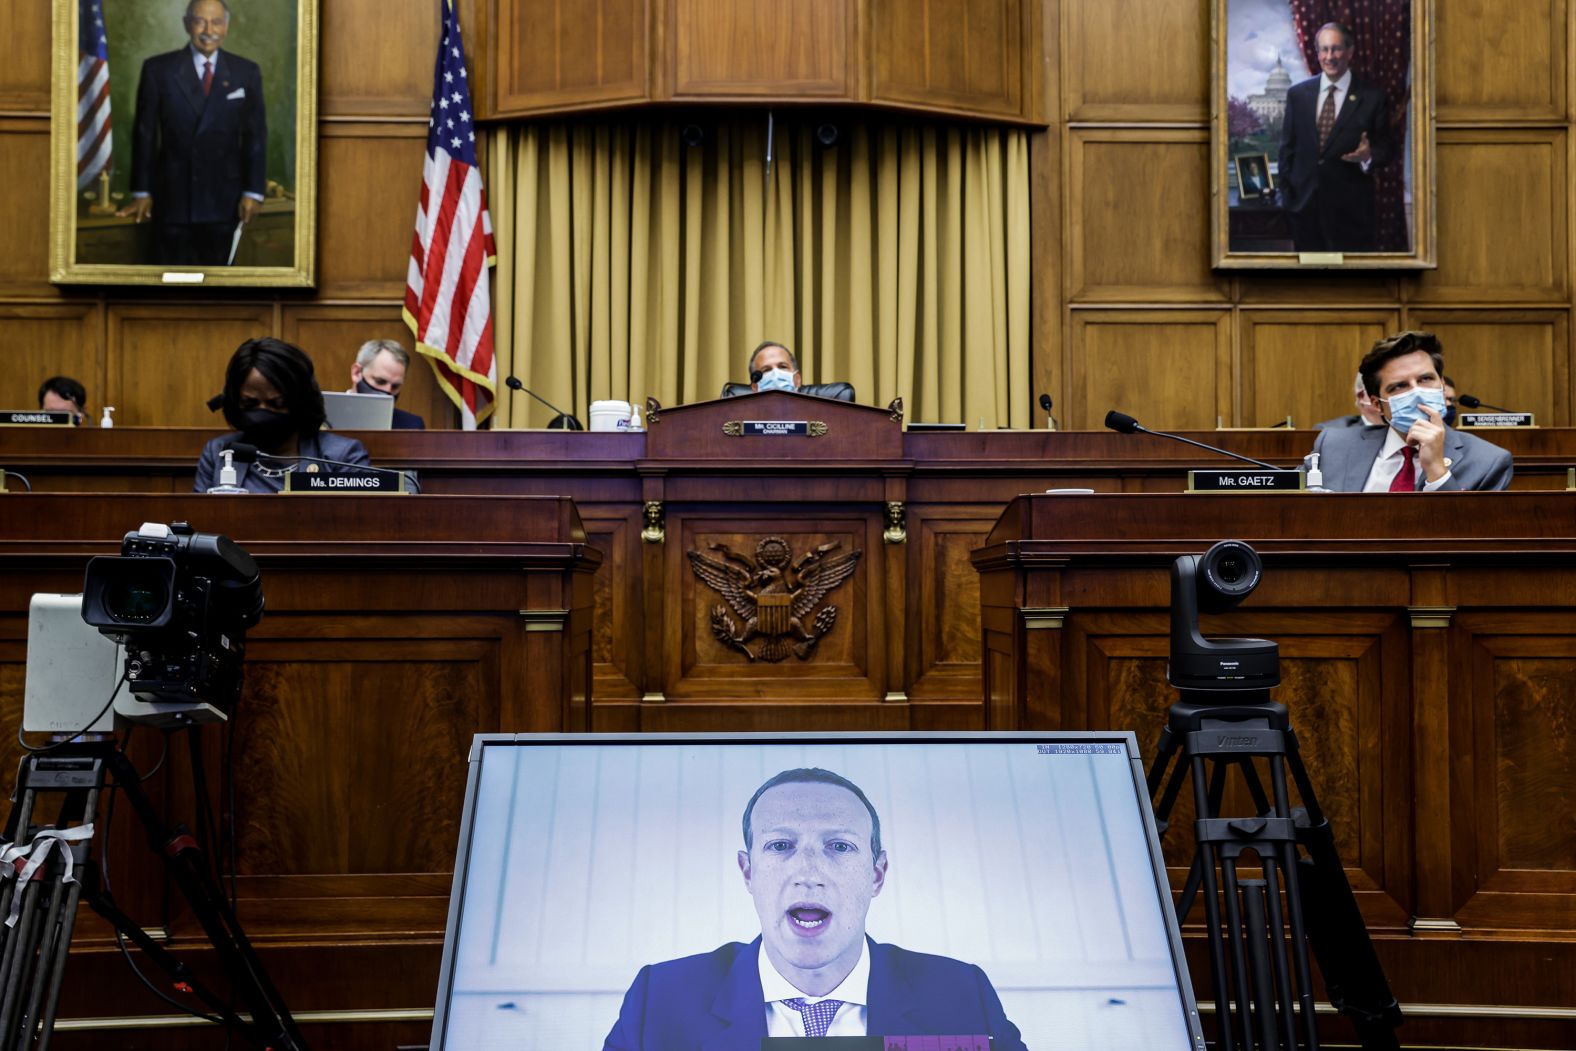 Zuckerberg speaks to a US House subcommittee via video conference in 2020. During a high-profile antitrust hearing, Zuckerberg and three other tech titans — Amazon CEO Jeff Bezos, Apple CEO Tim Cook and Google CEO Sundar Pichai — <a href="https://www.cnn.com/2020/07/29/tech/tech-antitrust-hearing-ceos/index.html" target="_blank">were hit with tough questions and documents</a> that raised concerns about their competitive tactics.